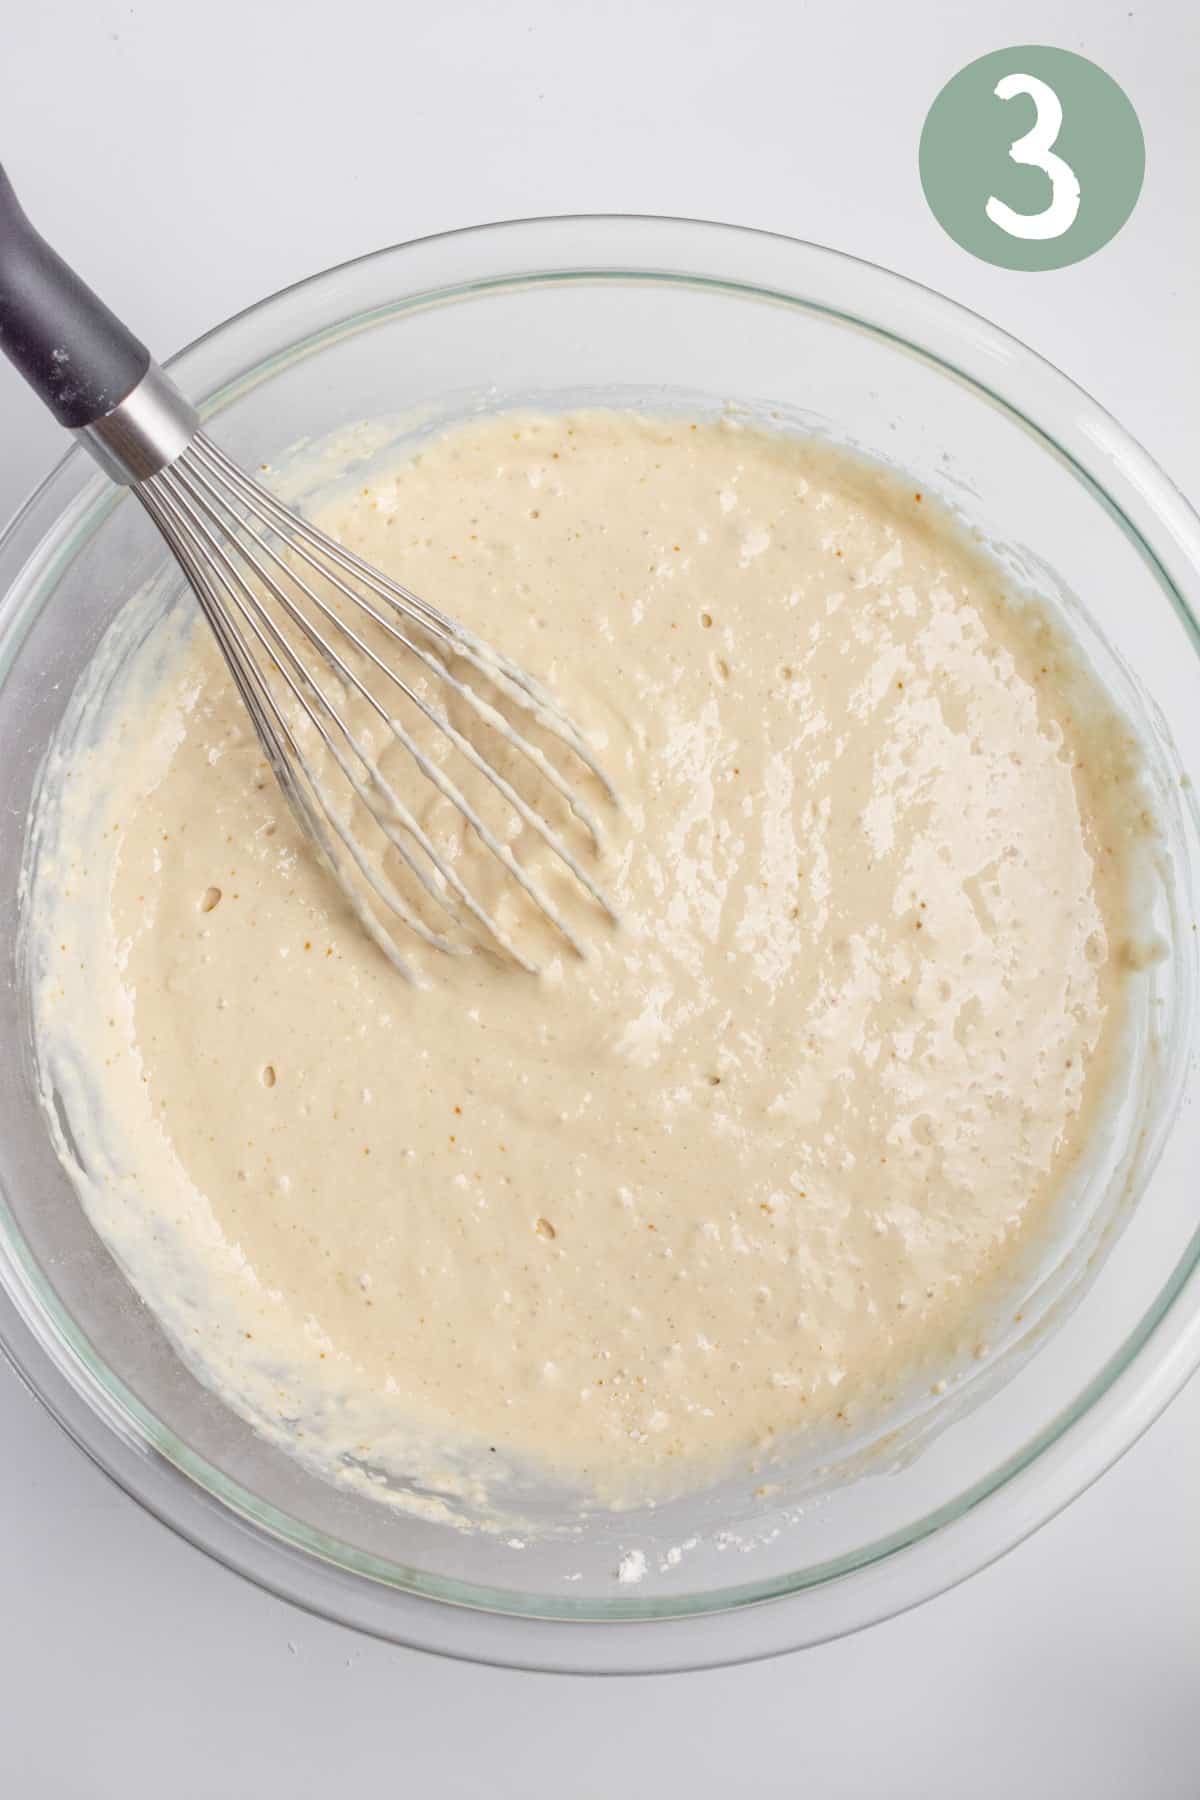 A glass bowl of vegan pancake batter with a whisk.